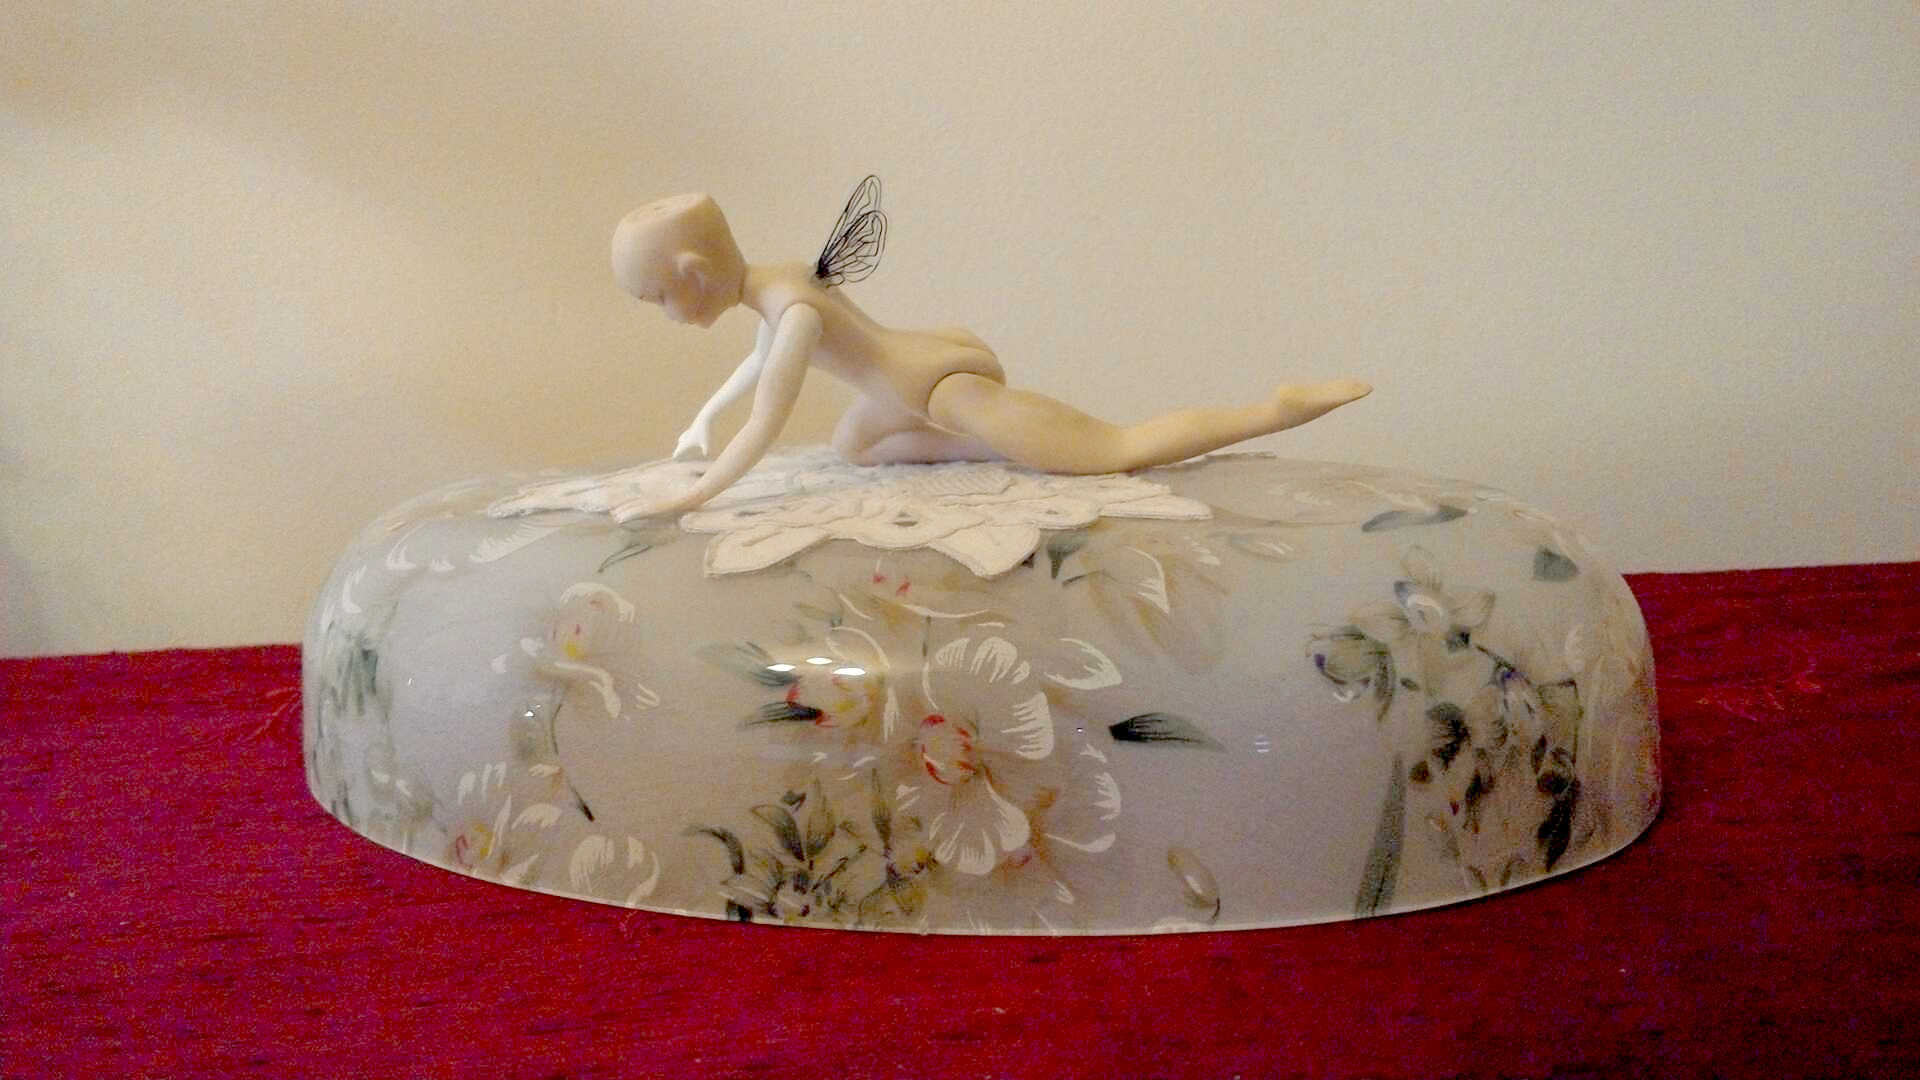 Sculpture "In the Face of Reality" by Libby Bloxham. A small articulated doll, with no hair or clothing, attached, is posed on top of a glass dome painted with floral designs, beneath her a white lace doily. The doll is facing downward, arms extended before her, kneeling on one leg with the other outstretched behind, giving the impression she is either landing or rising from where she rests. Acetate insect wings, very small compared to the doll's body, extend from her shoulders.